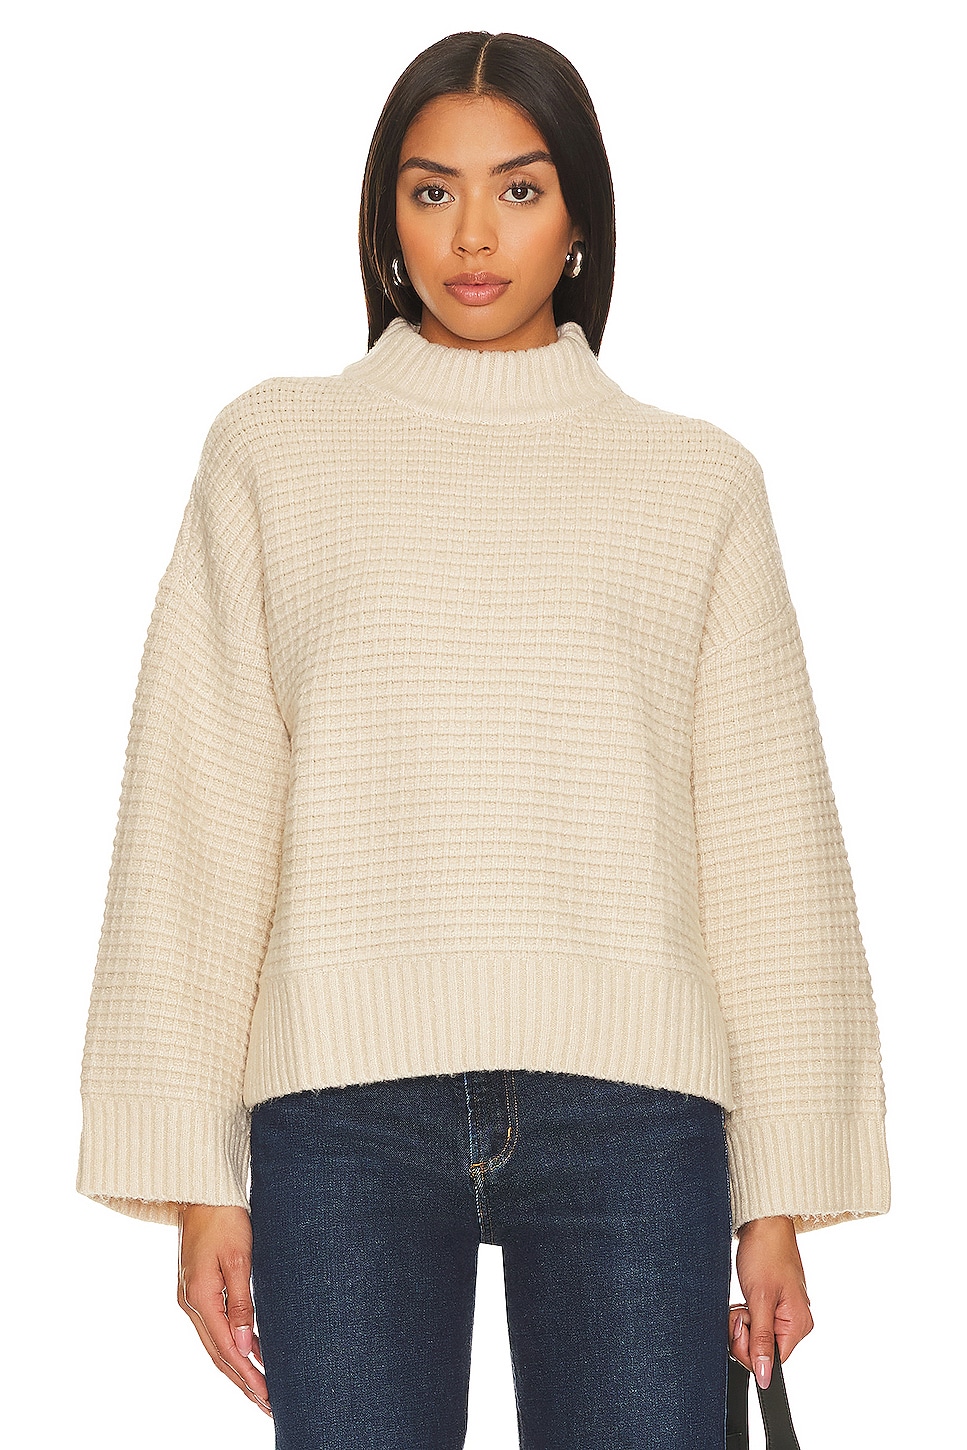 Sanctuary Waffle Knit Sweater in Toasted Marshmallow